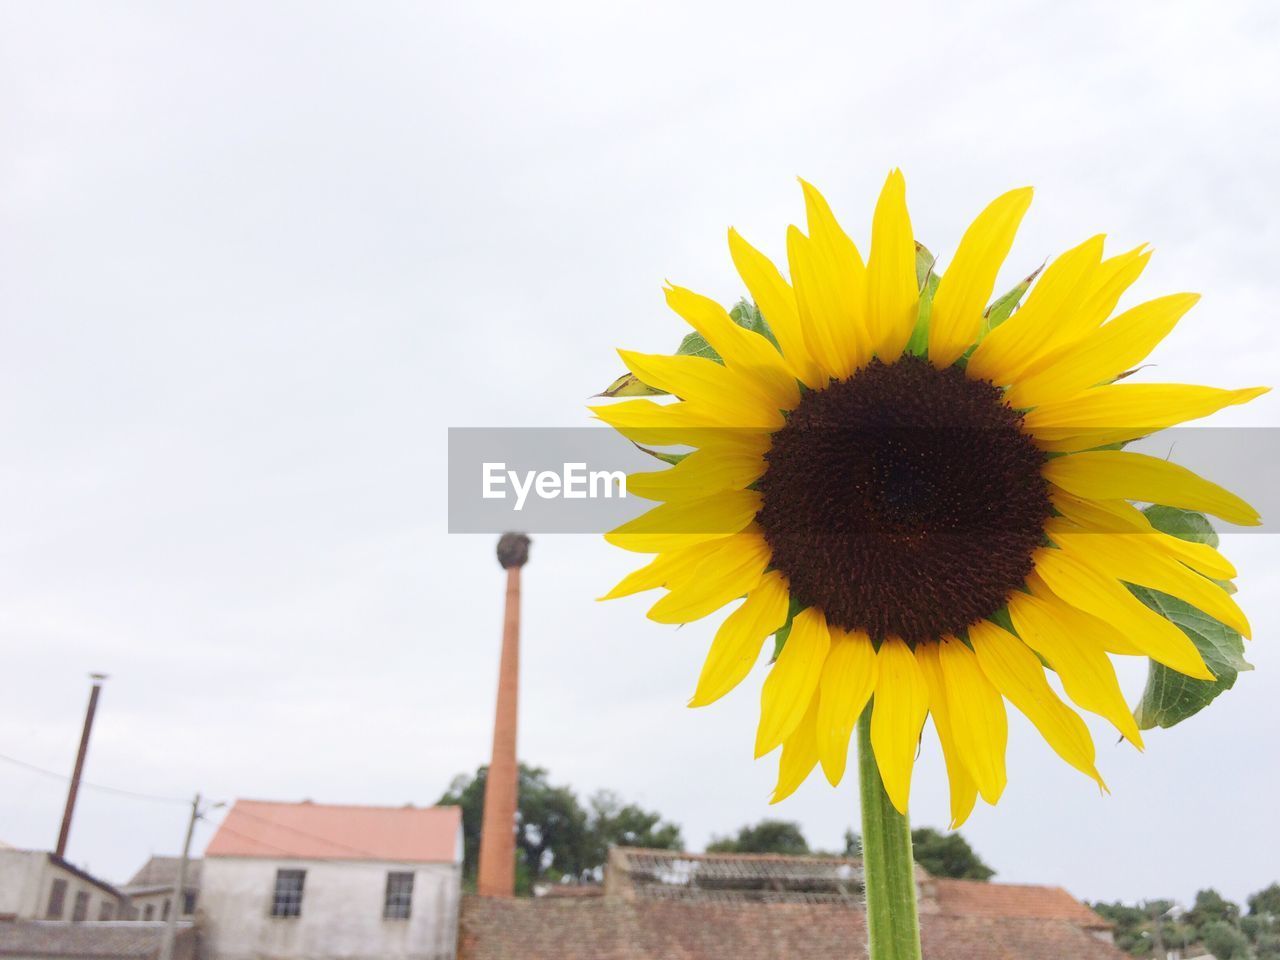 CLOSE-UP OF SUNFLOWERS AGAINST BUILDINGS